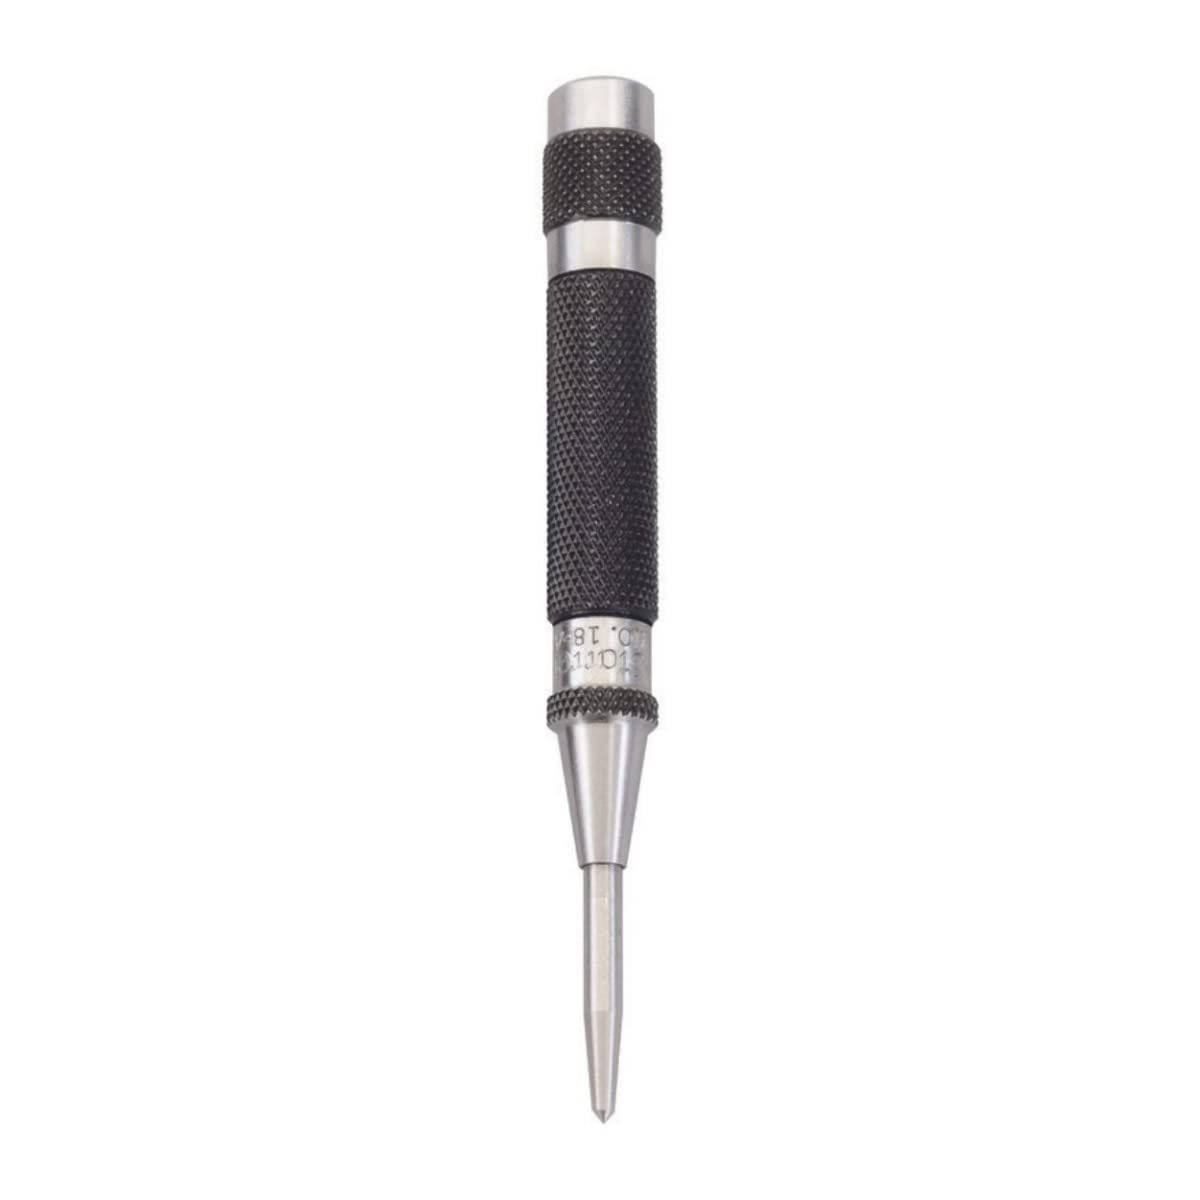 Starrett Automatic Center Punch with Hardened Steel Metal - 100mm Length, 11mm -